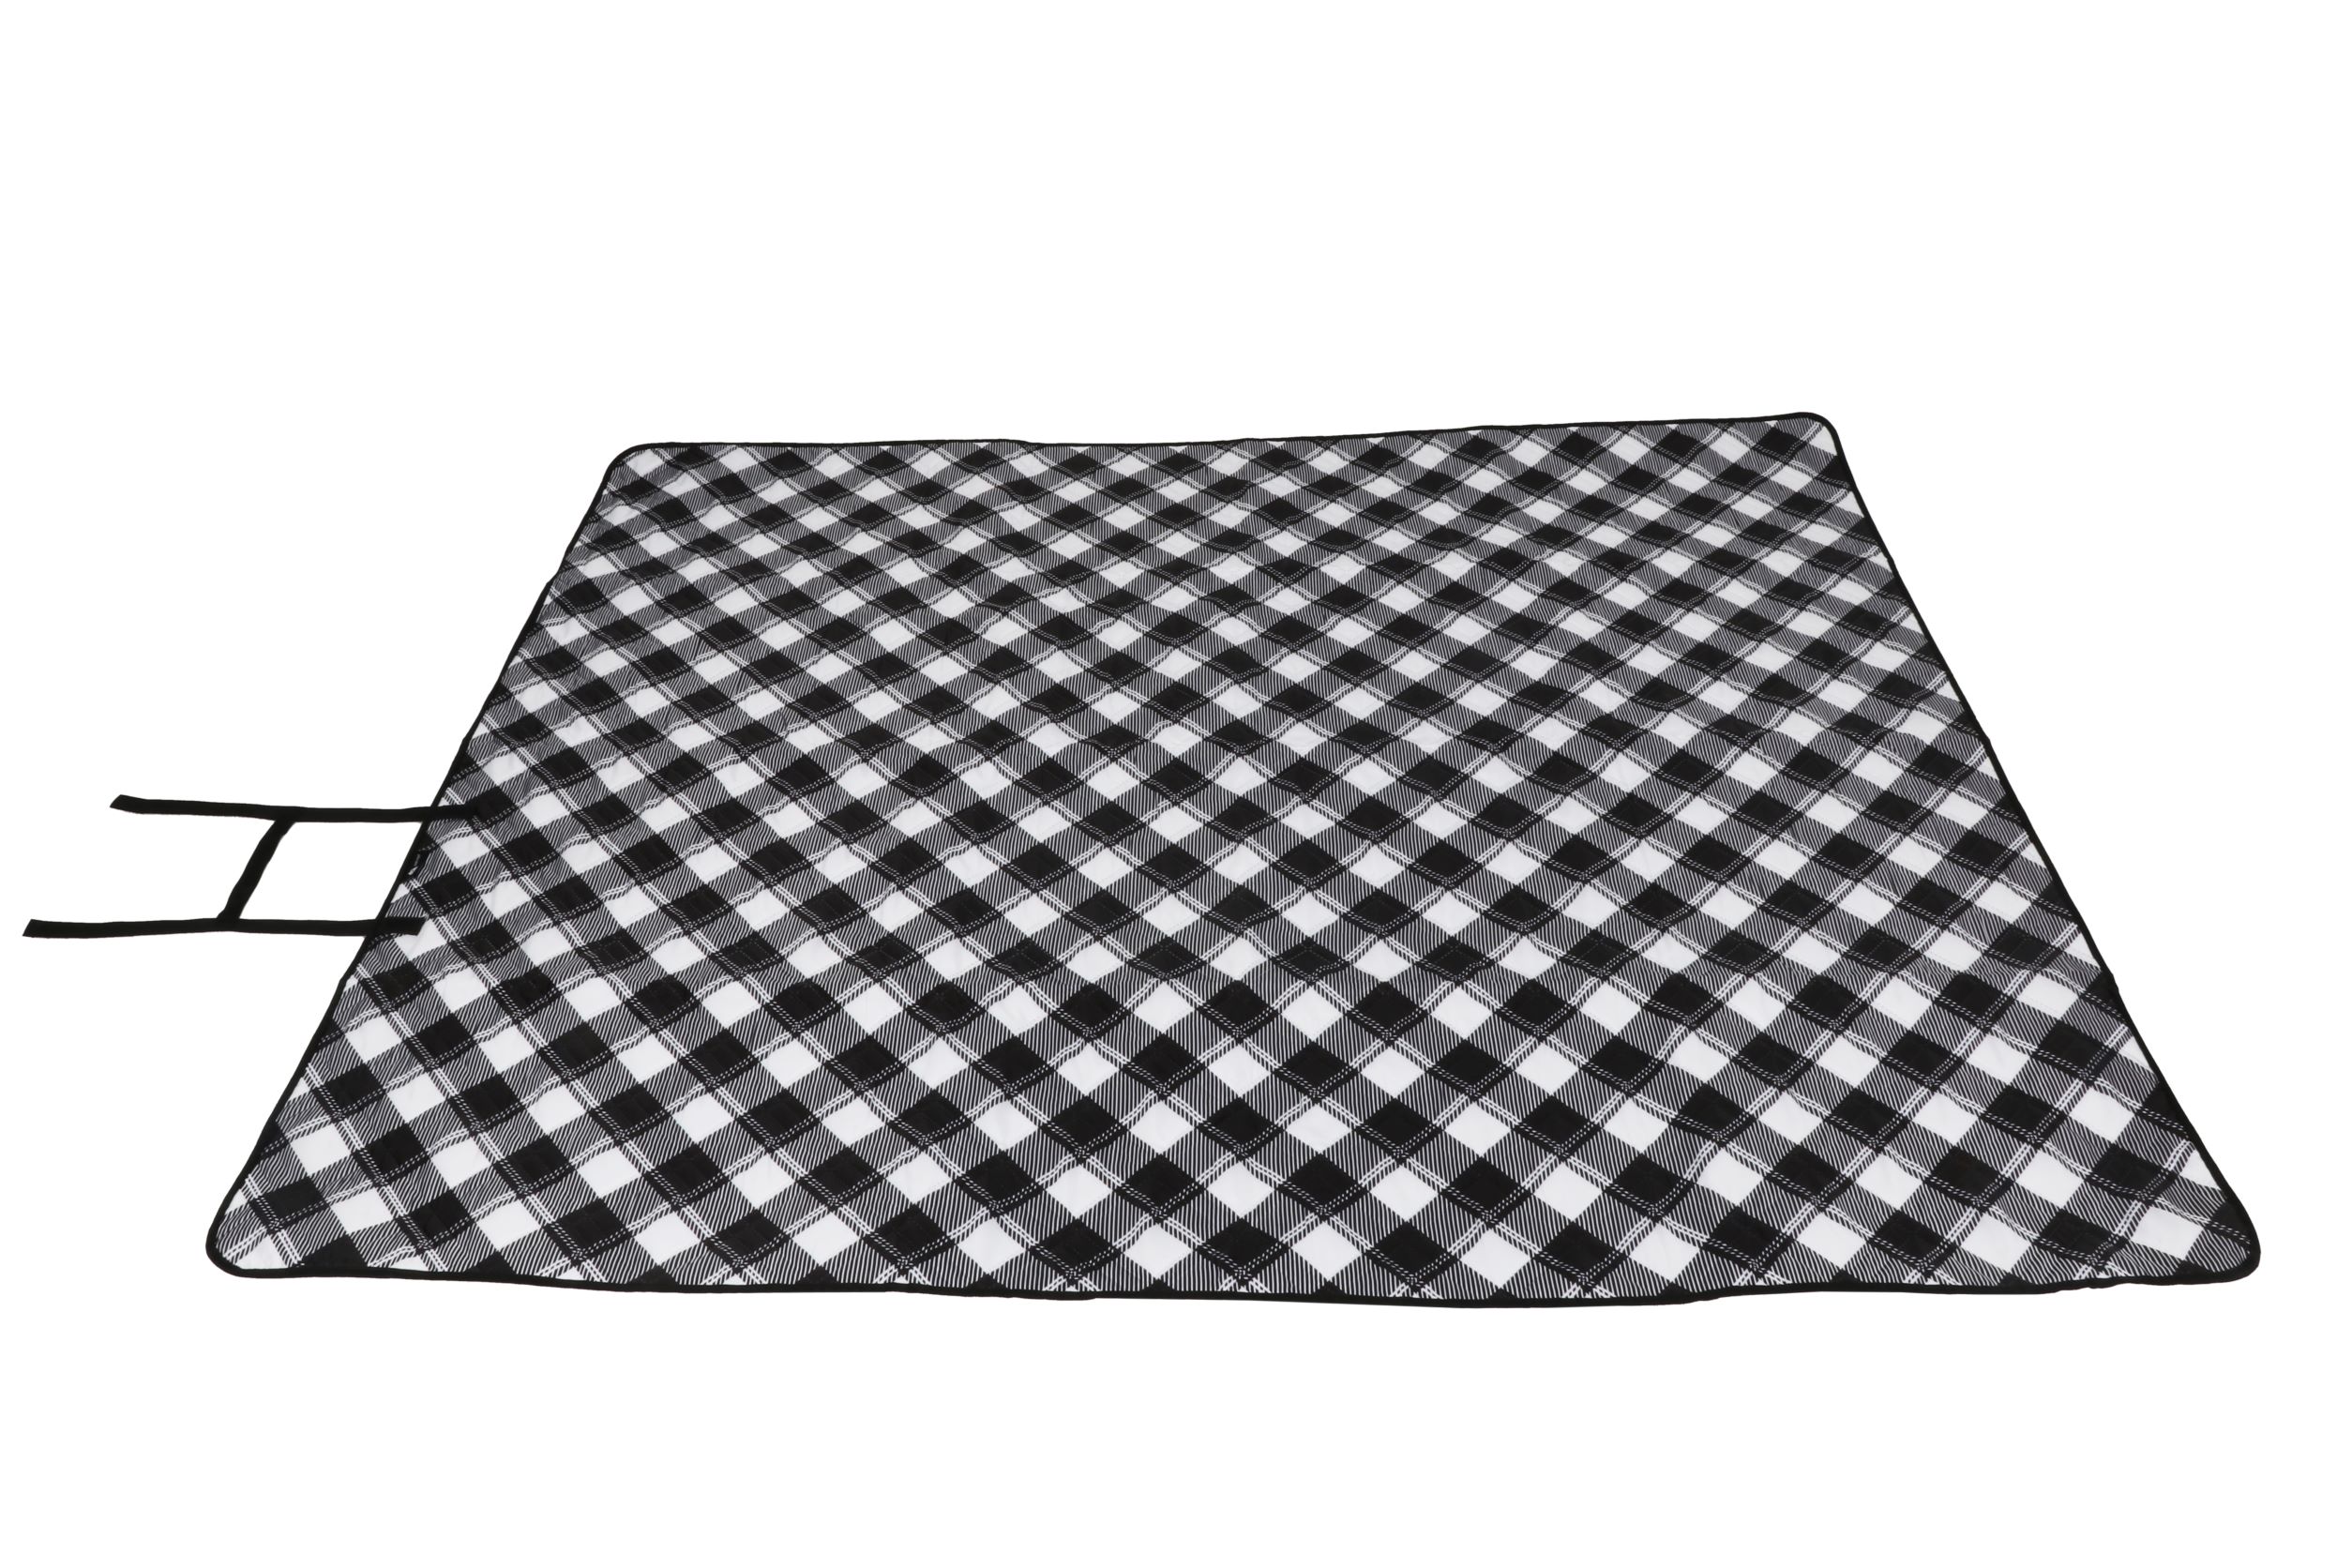 Ozark Trail Blanket and Two Chair Combo, Adult, Black White - image 2 of 14